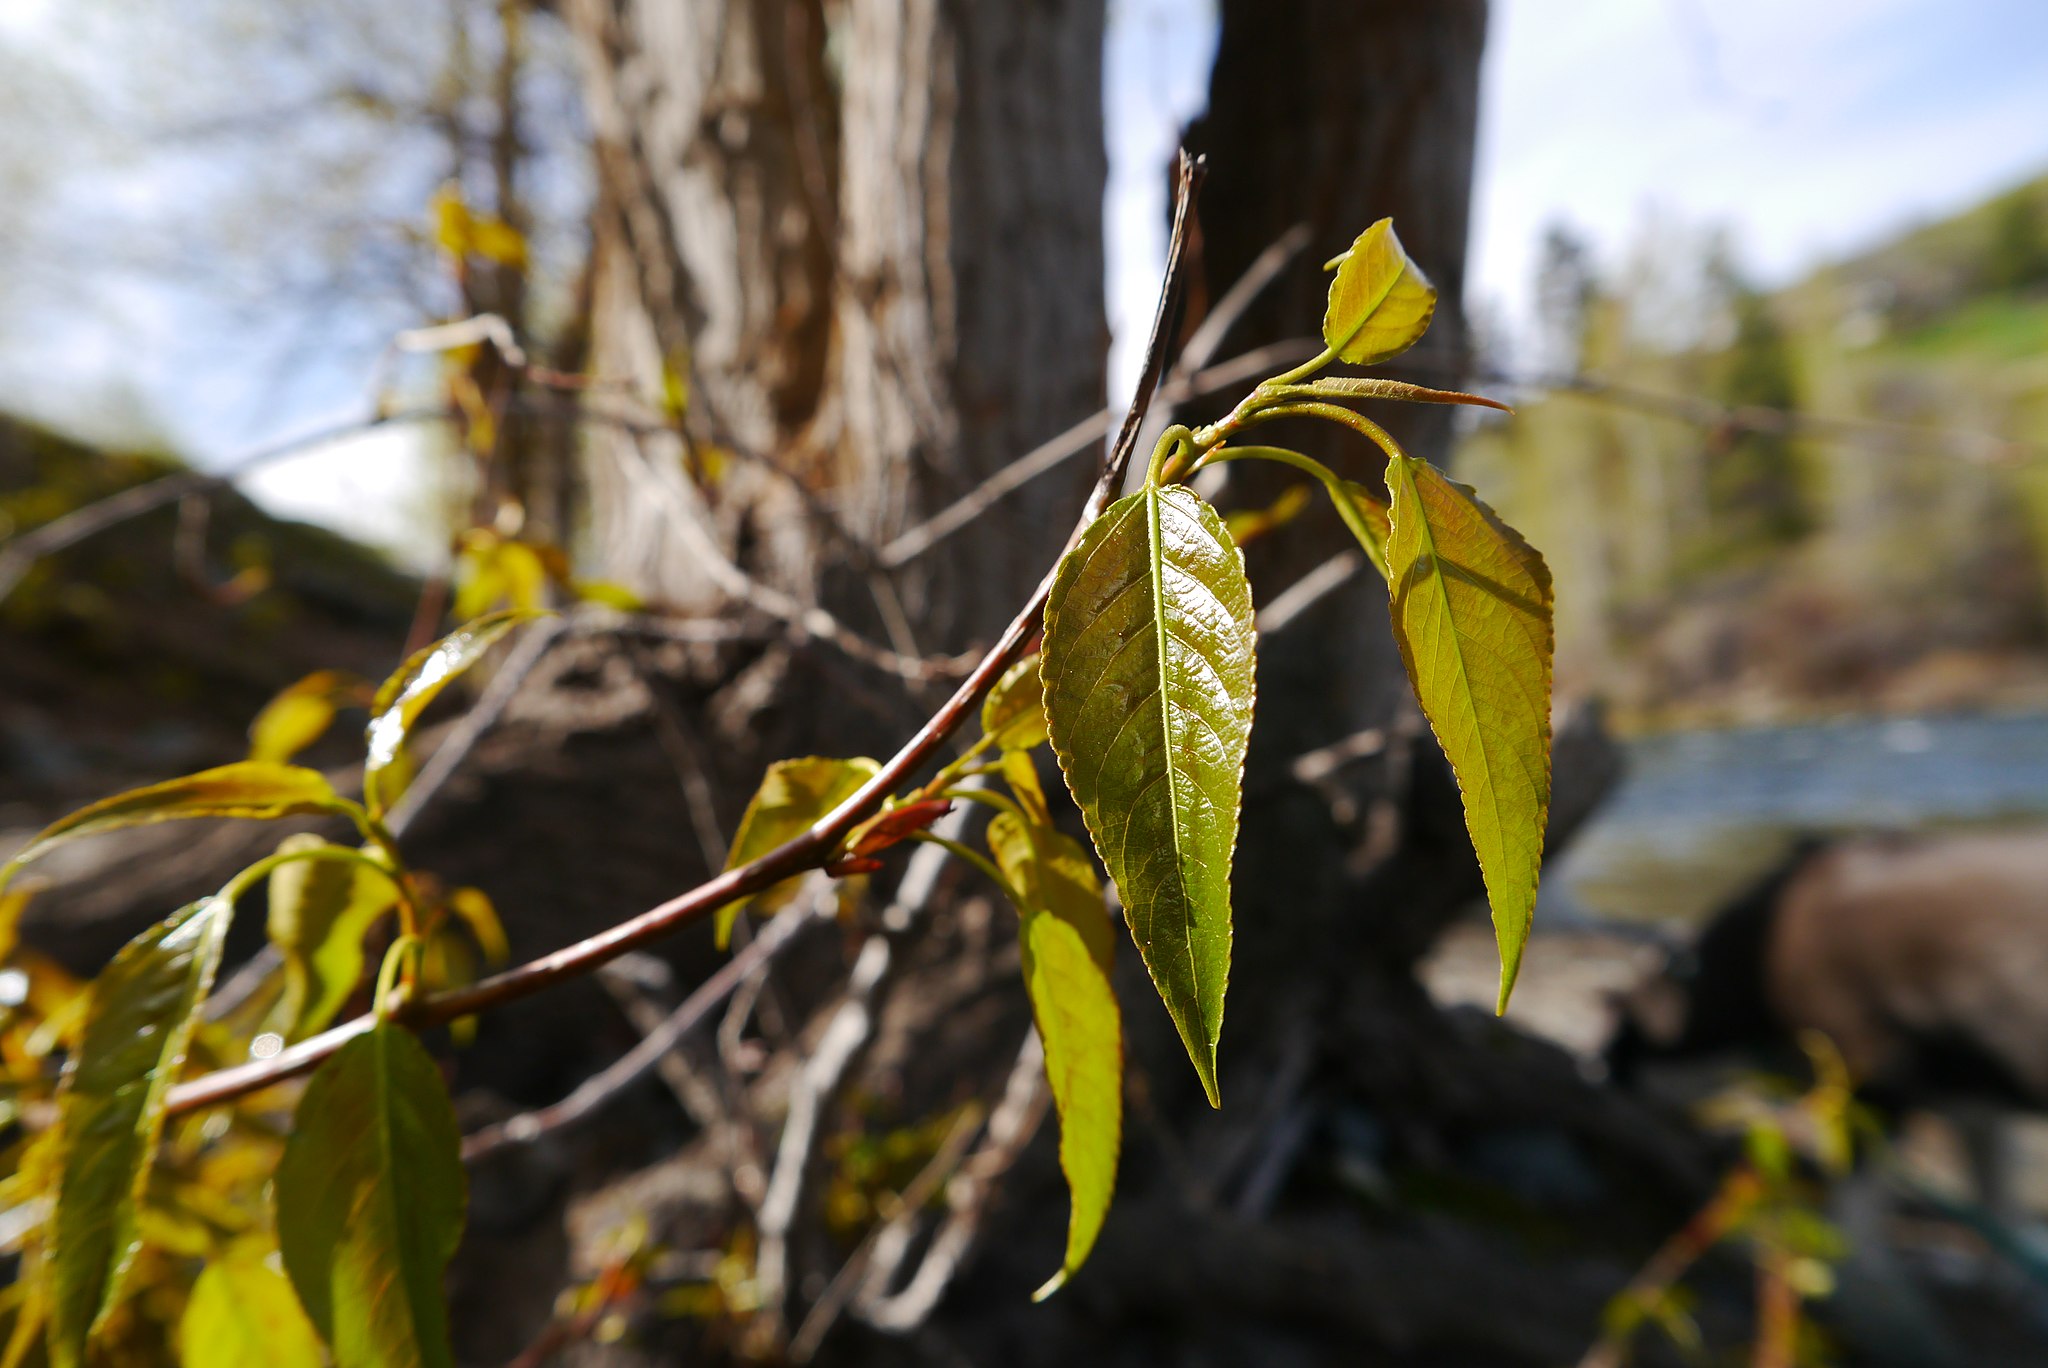 Green, shiny leaves emerging from a deep, red branch in the foreground, with a large tree trunk and stream out of focus in the background